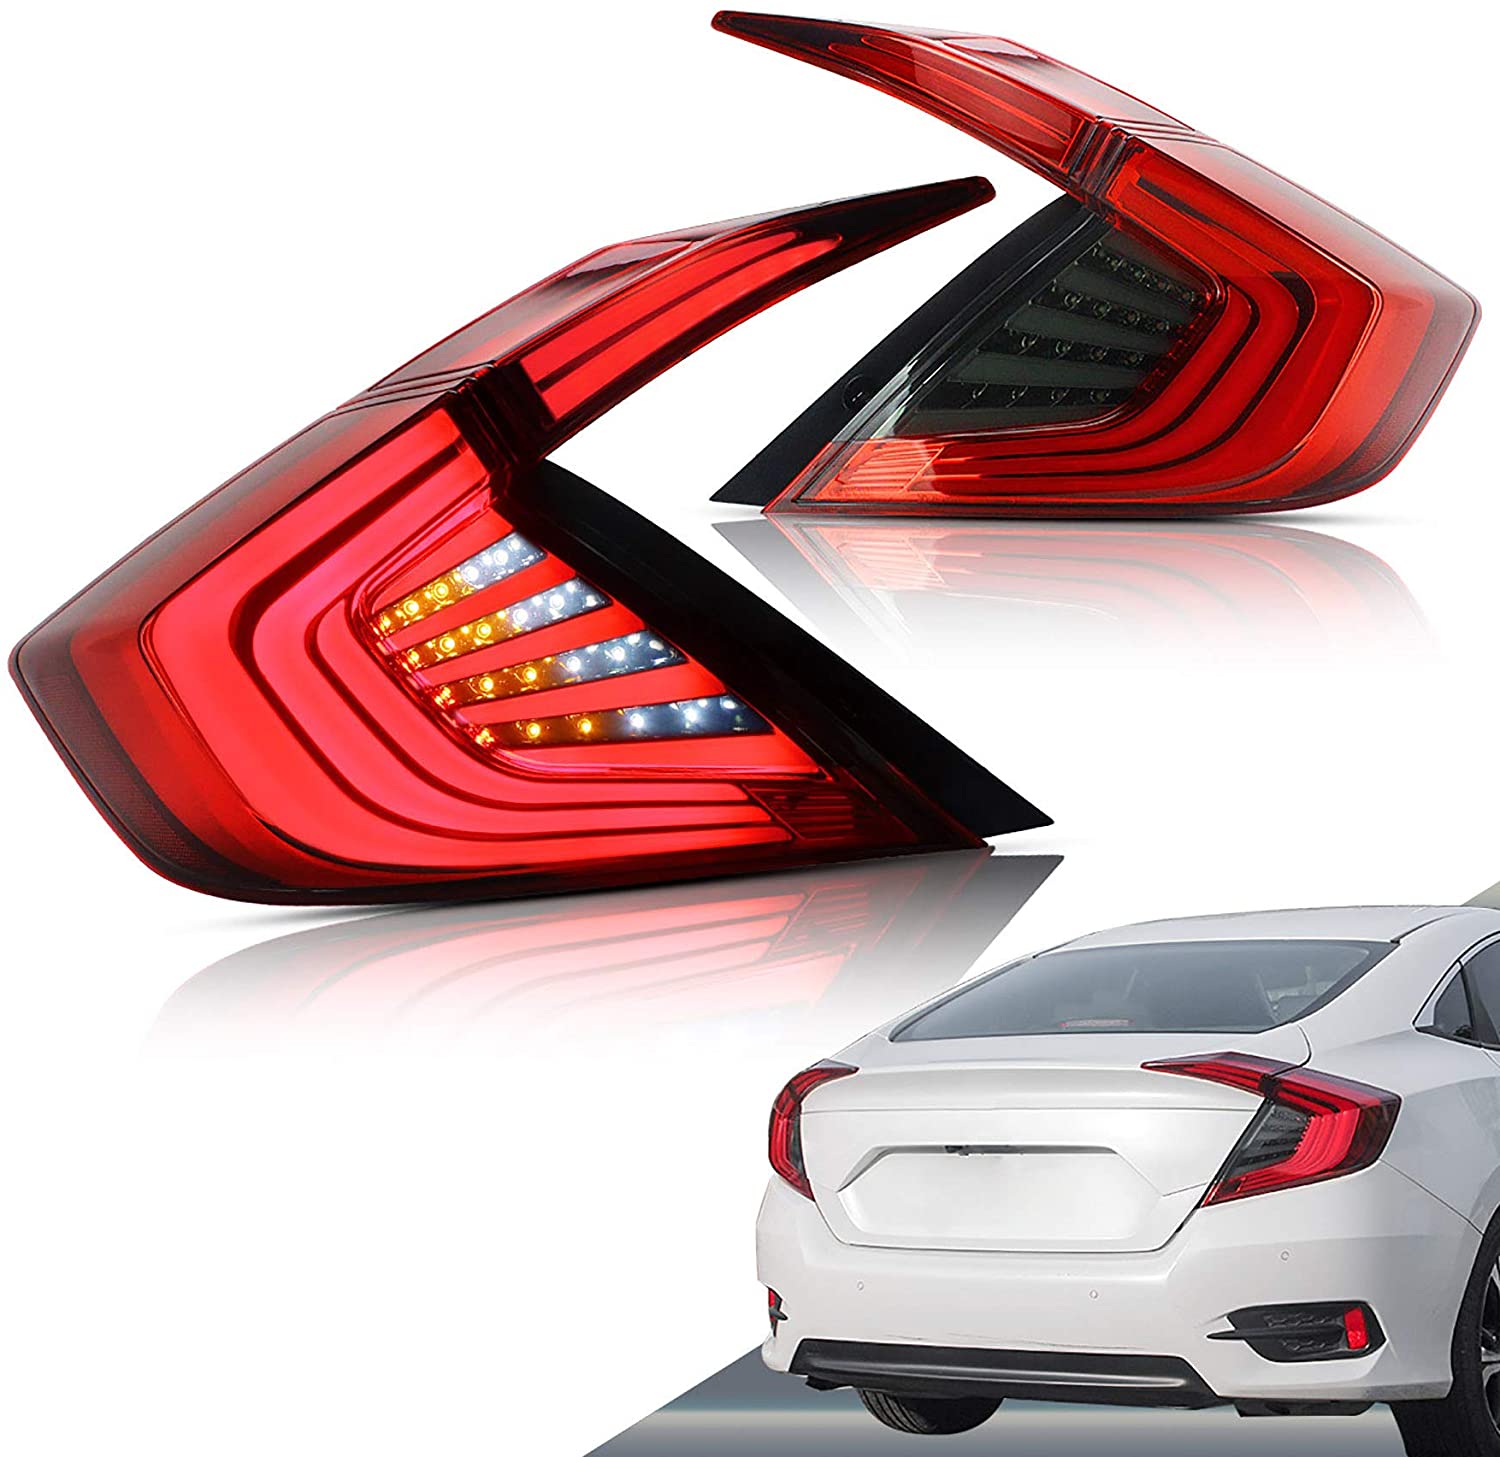 VLAND LED Tail lights Compatible with Honda Civic 2016 2017(Not Fit Coupe, Type R, Hatchback), 3D Led Light Bar Style Rear Lamp Assembly Including DRL Turning Brake and Reverse Light, Red&Smoke (Red&smoke)